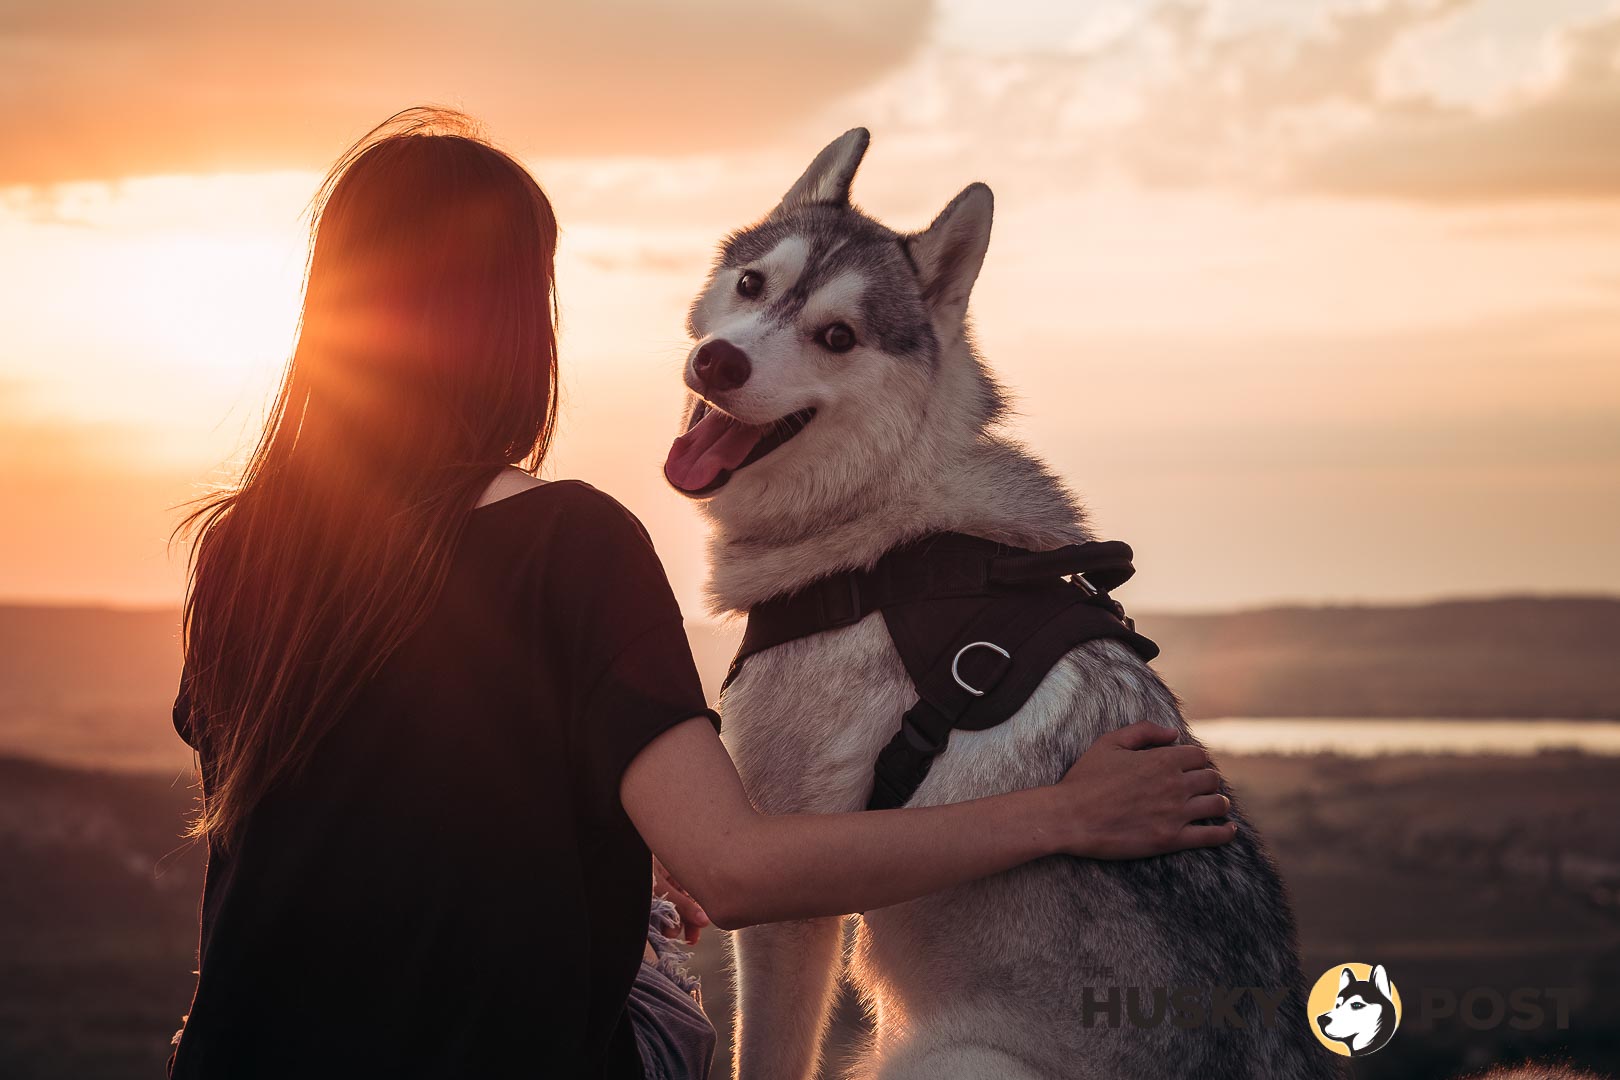 Beautiful girl plays with a dog - grey and white husky in the mountains at sunset